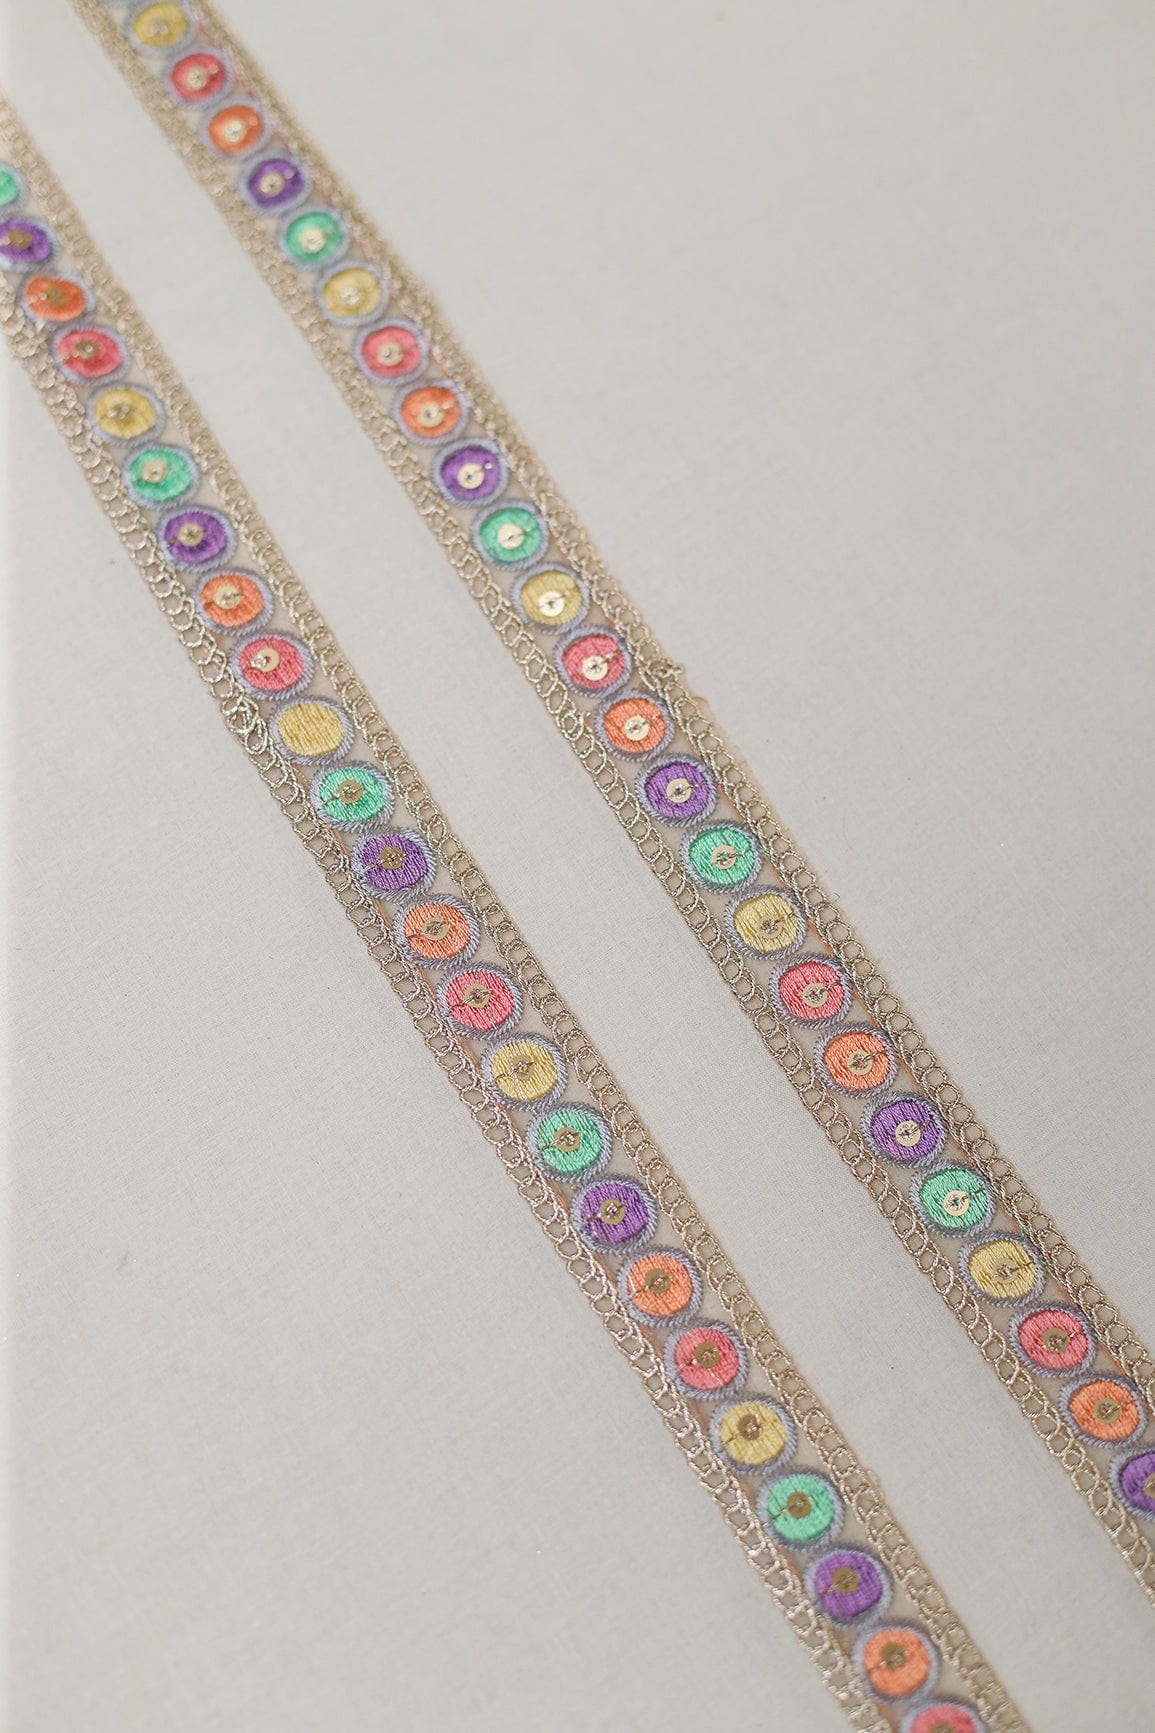 doeraa Laces Geometric Multi Color Thread Work With Gold Sequins Embroidered Lace (9 Meters)